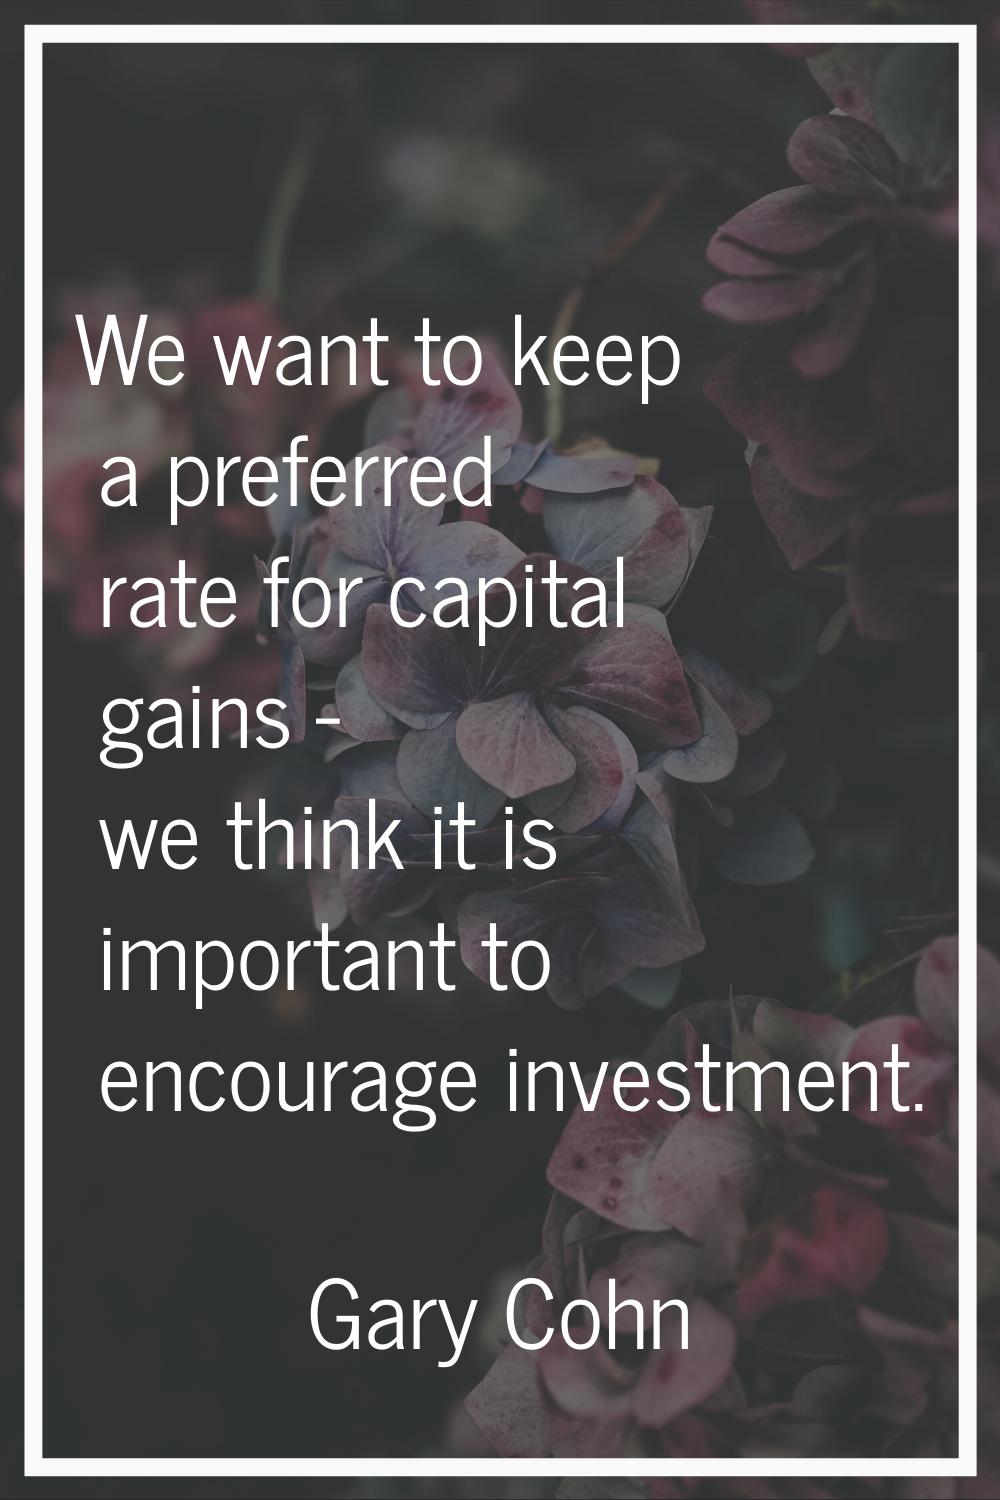 We want to keep a preferred rate for capital gains - we think it is important to encourage investme